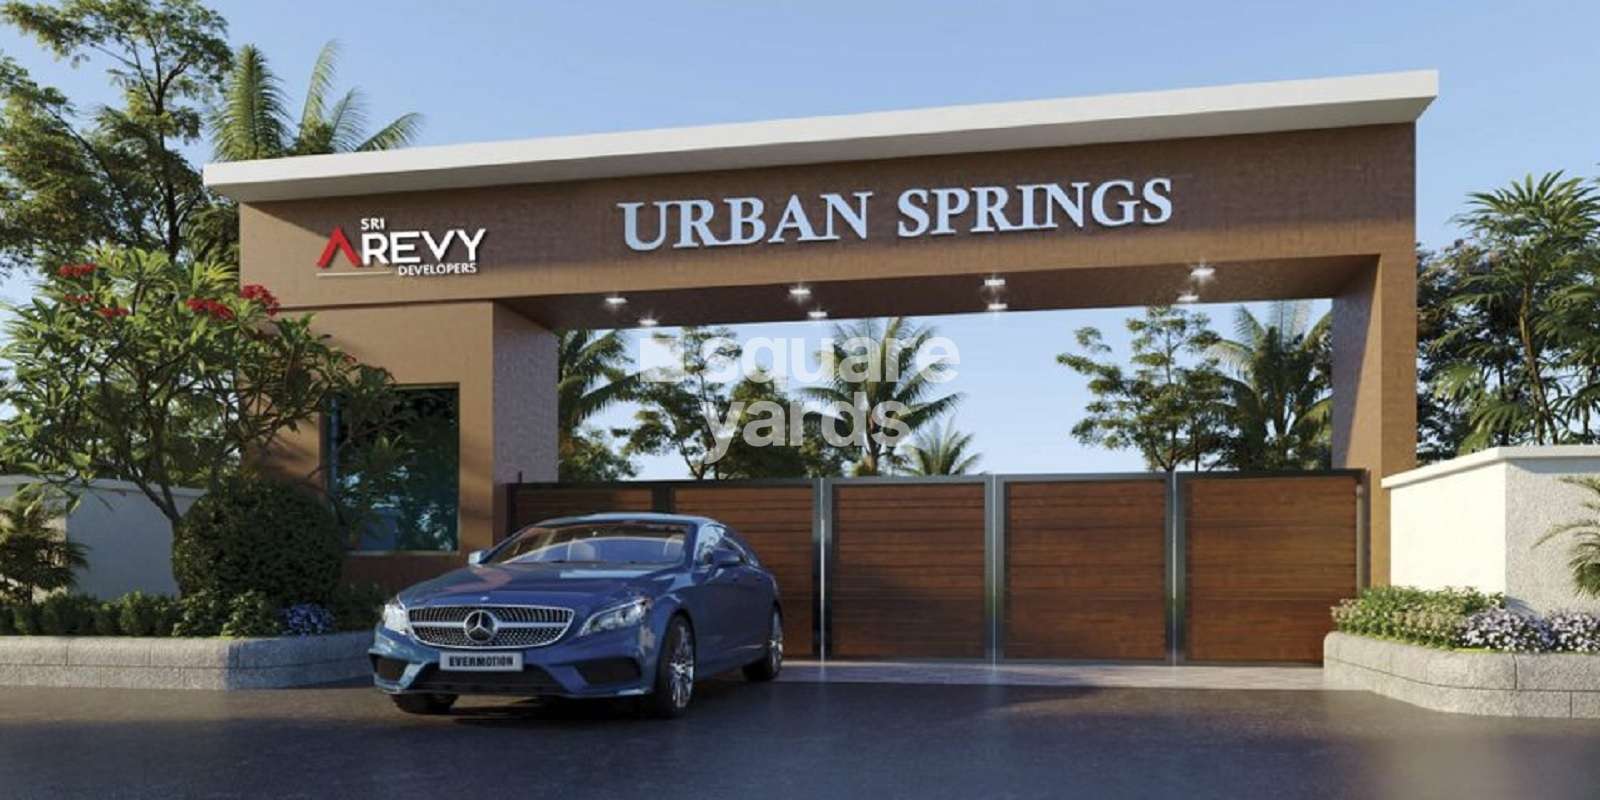 Sri Arevy Urban Springs Cover Image